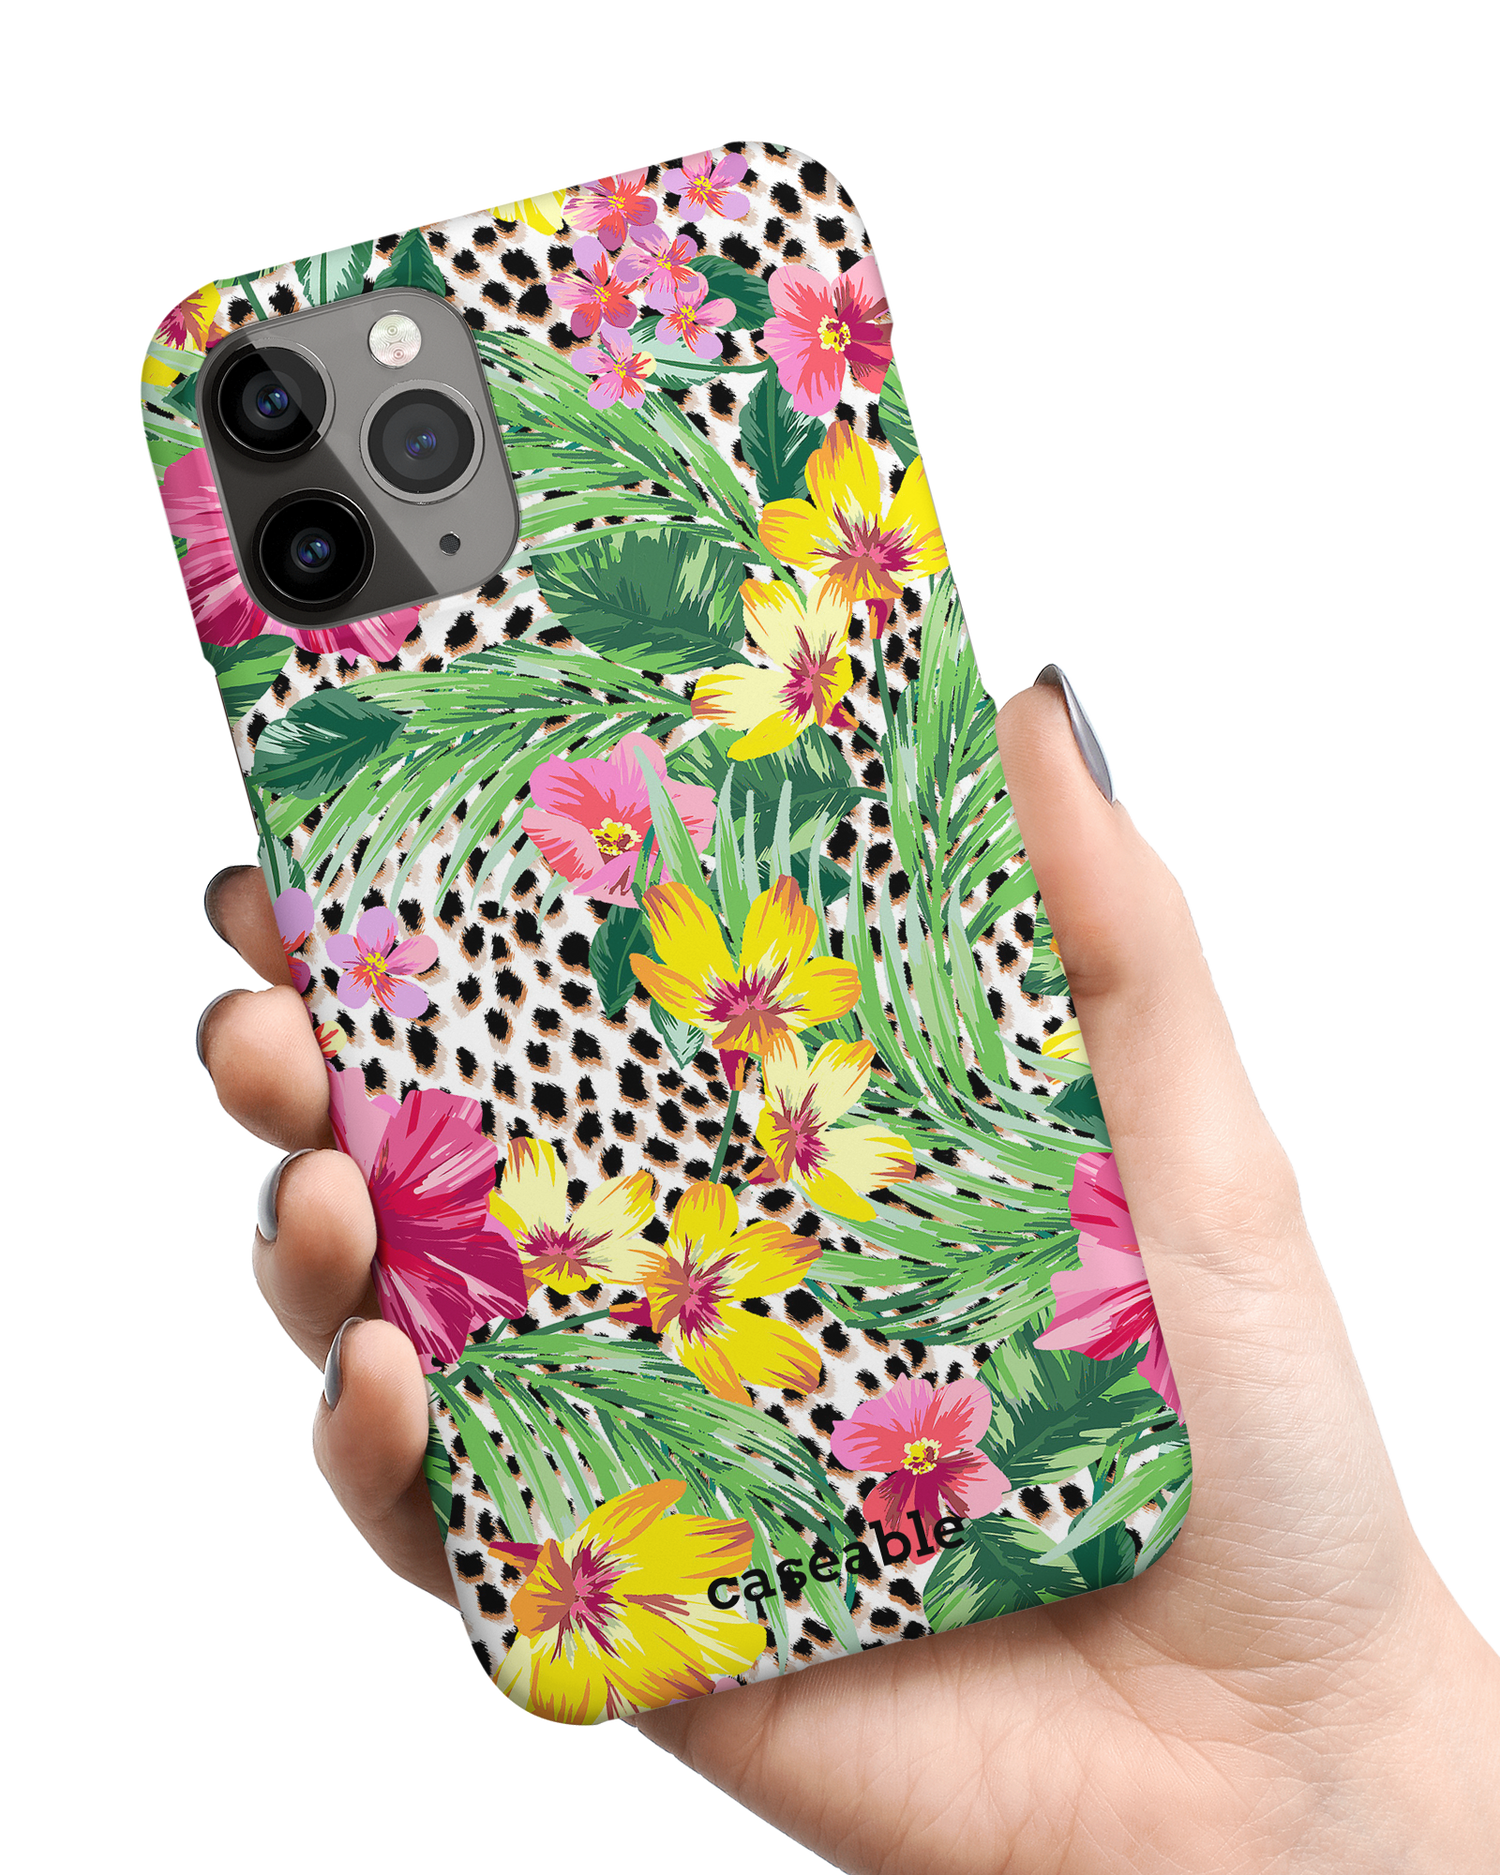 Tropical Cheetah Hard Shell Phone Case Apple iPhone 11 Pro held in hand